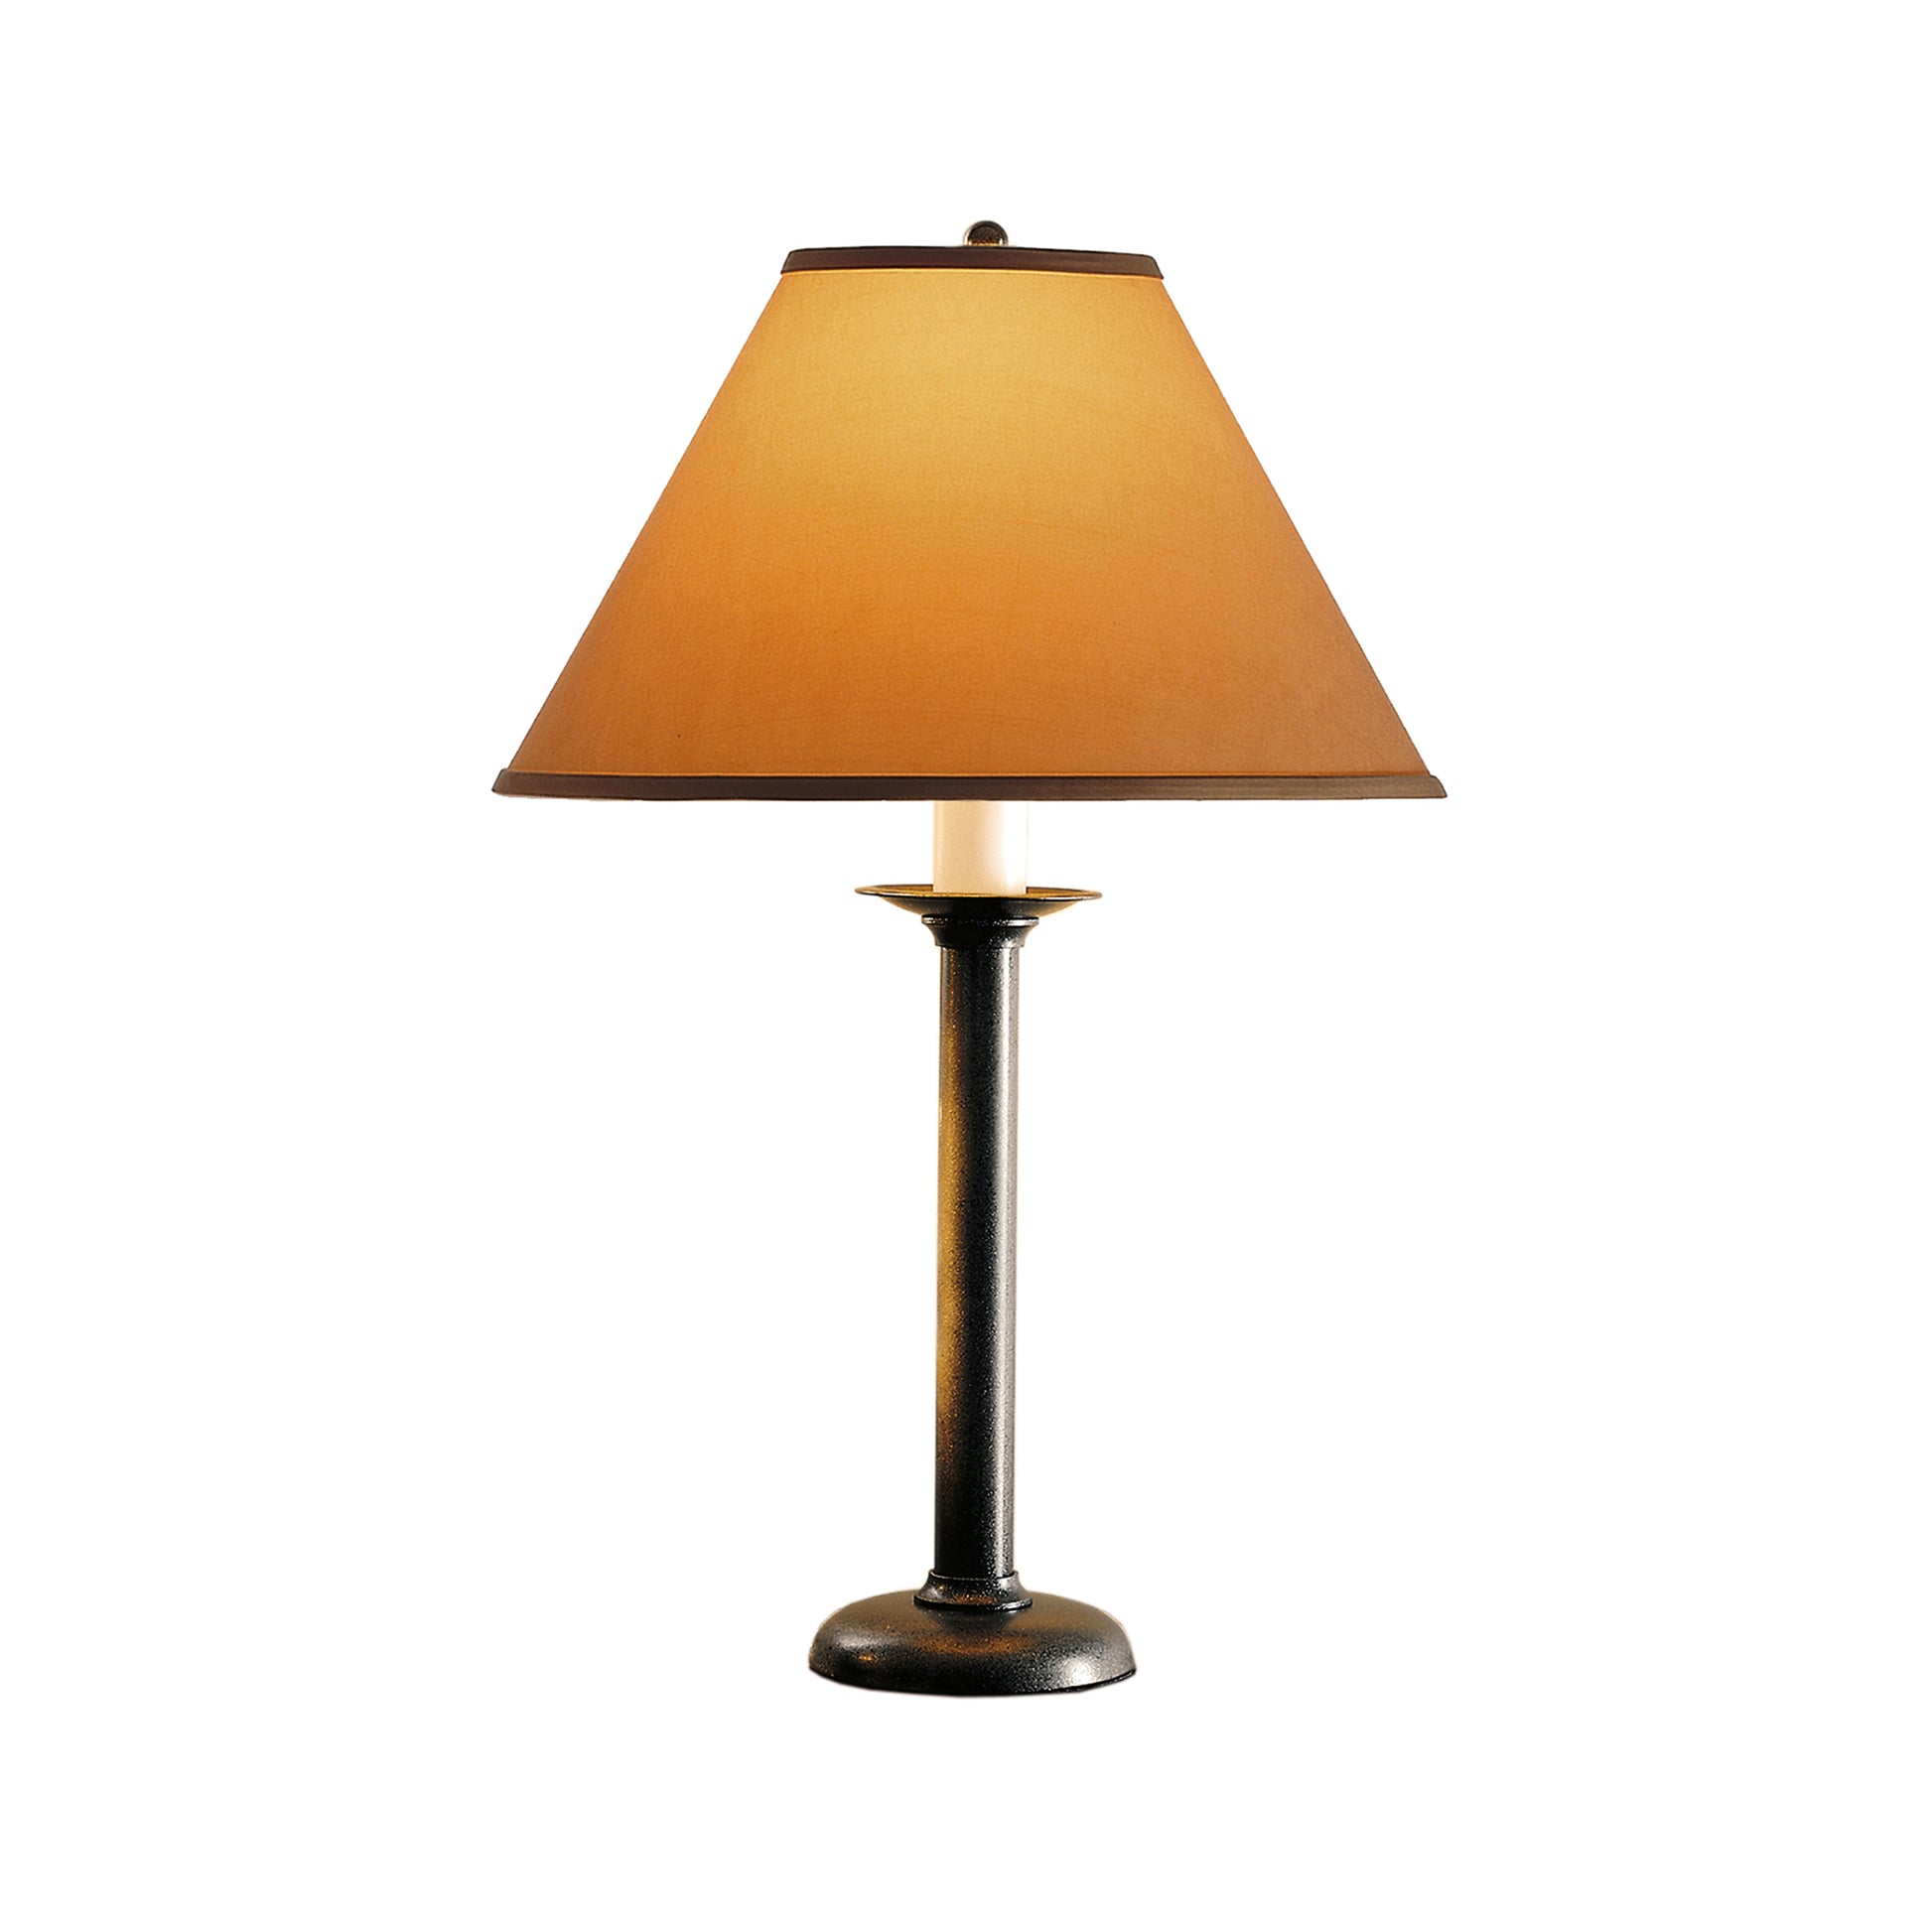 A traditional table lamp with a dark bronze base and a cone-shaped, light orange shade, illuminated. The "Simple Lines Table Lamp" by Hubbardton Forge is centered on a plain white background.